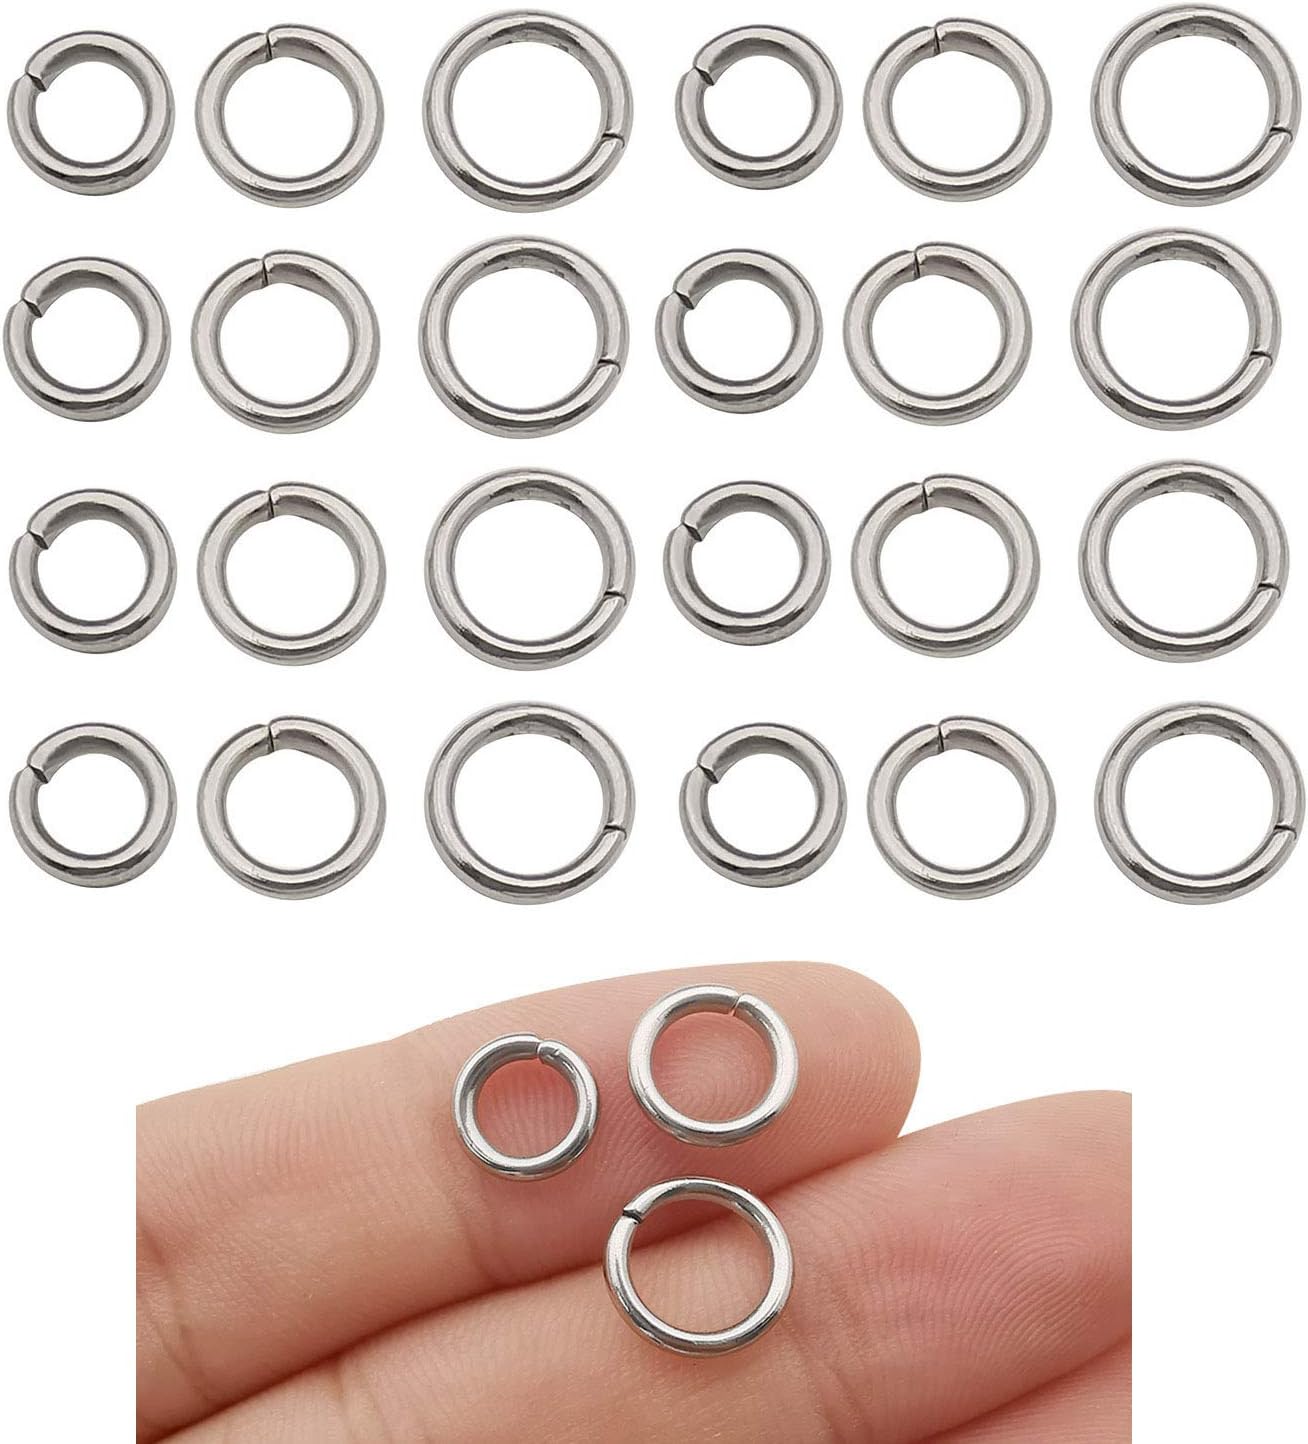 300pcs Mix 8mm 9mm 10mm Stainless Steel Thick Strong Rings Jump Rings Connector Rings for Jewelry Making Necklaces Bracelet Earrings Keychain DIY Craft (M536)